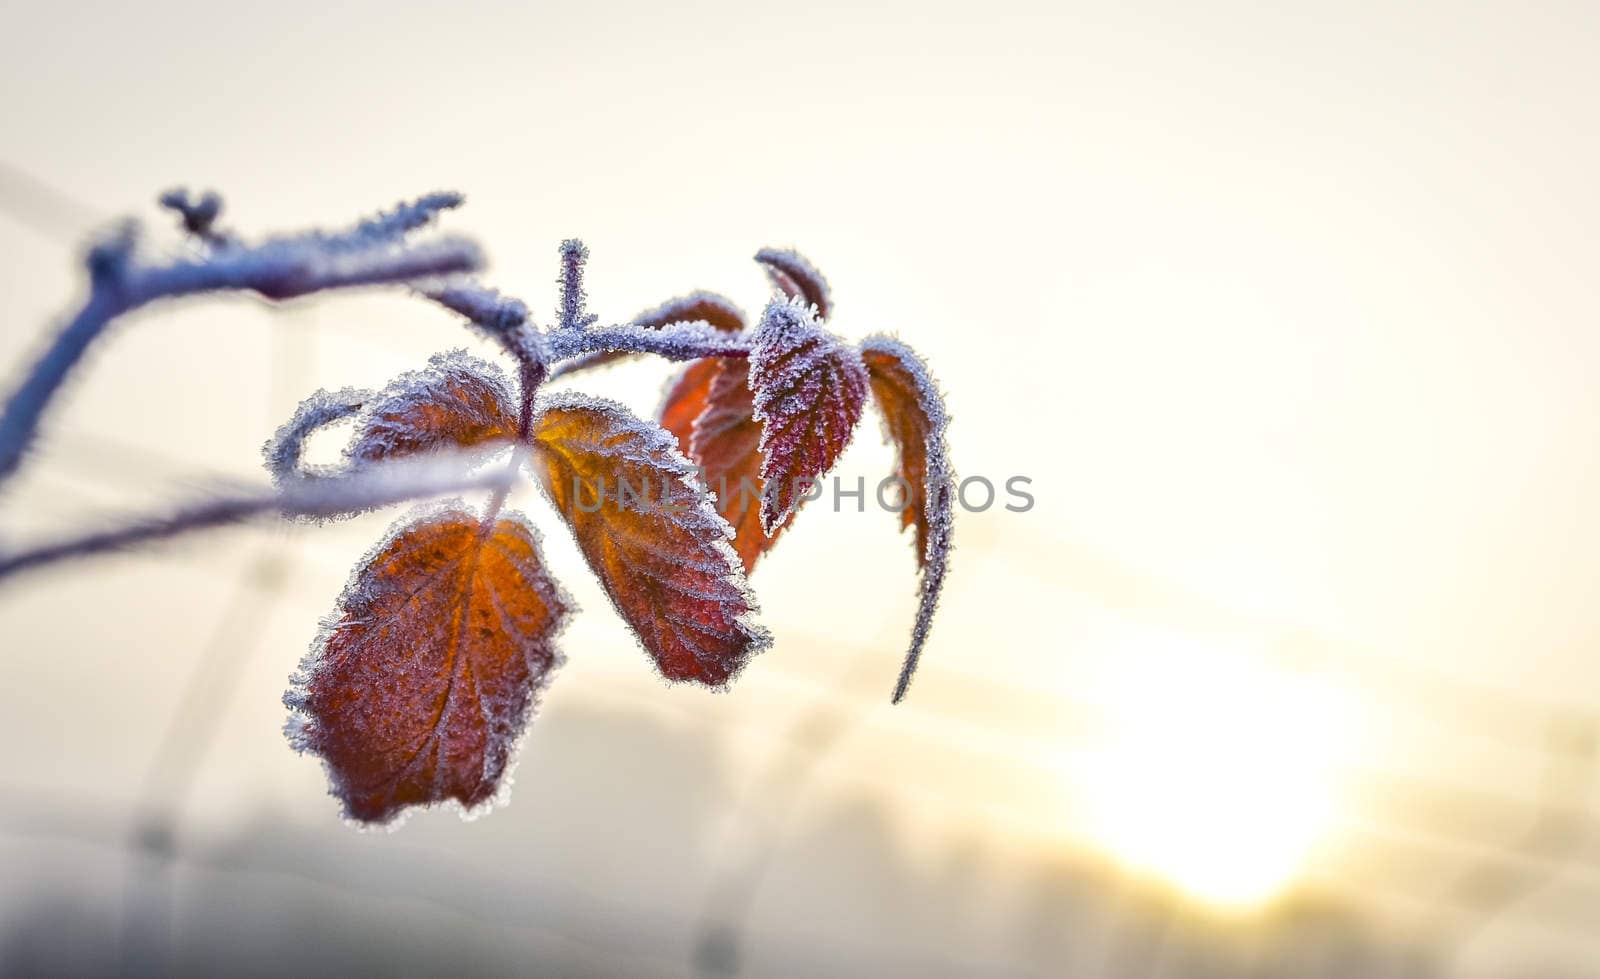 A bright frosty November morning finds the leaves of plants not yet fallen, coated in ice.